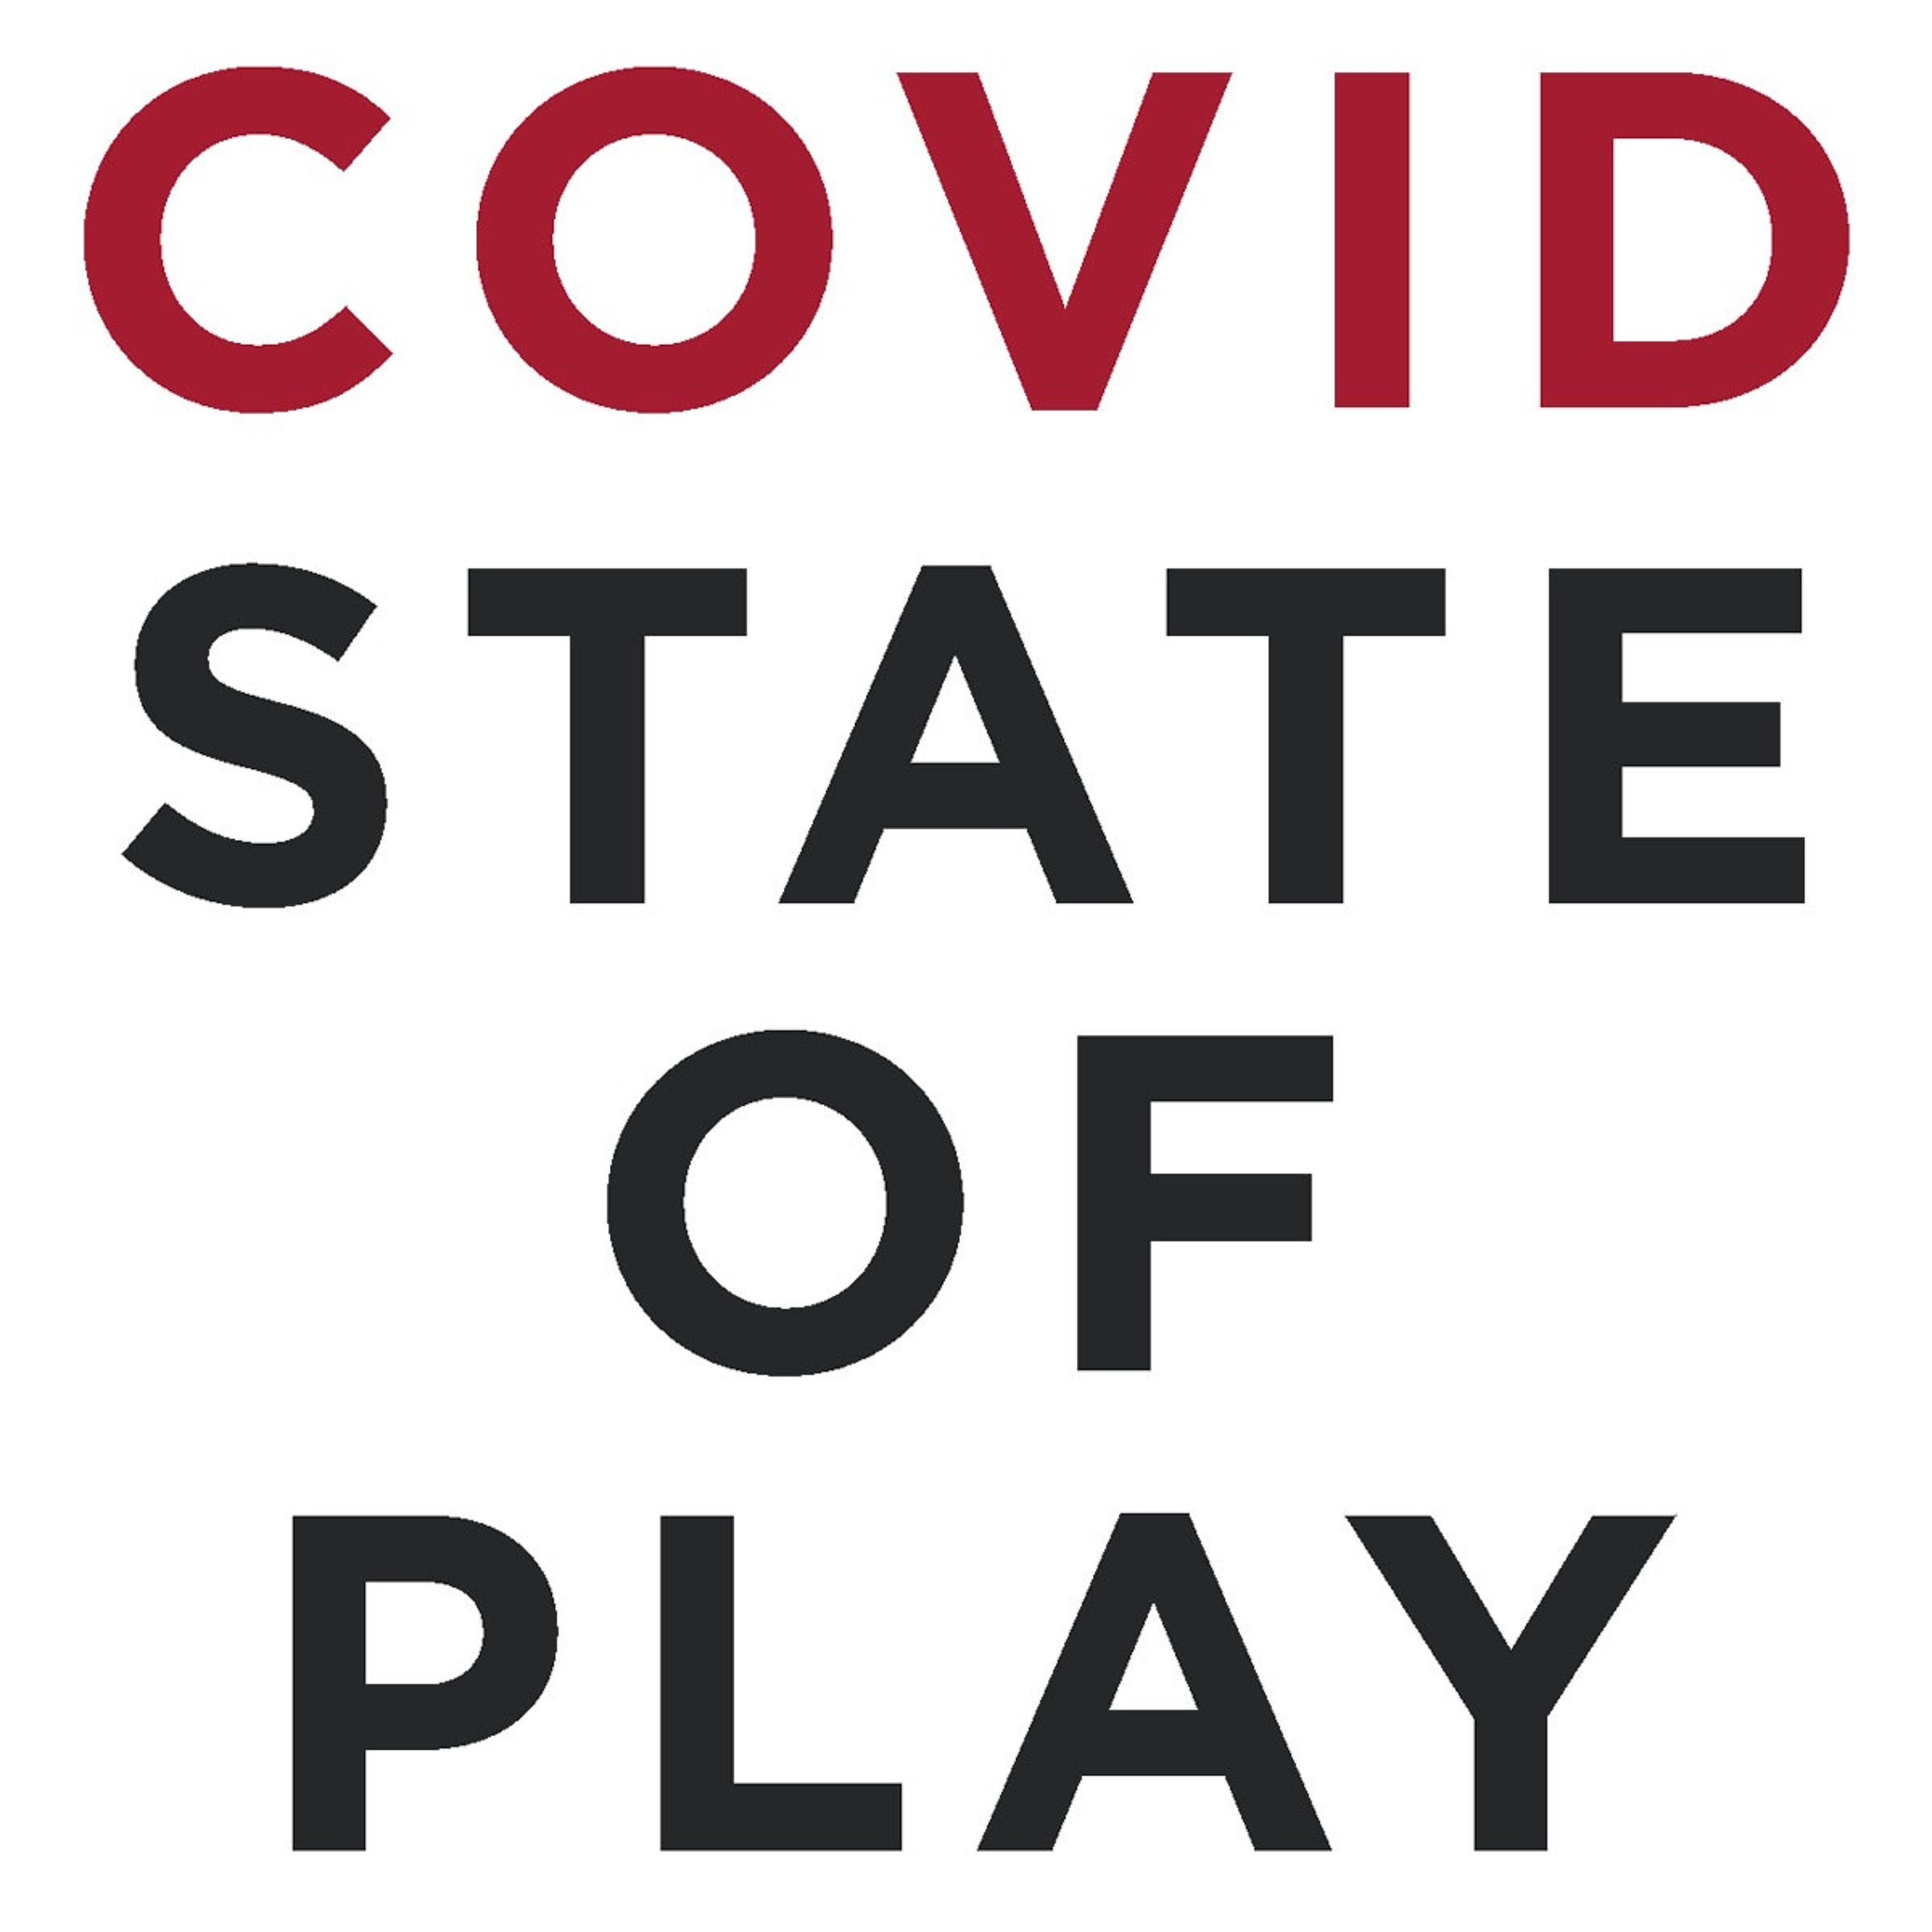 Covid State of Play: Building a Public Sector Health Intelligence Capability